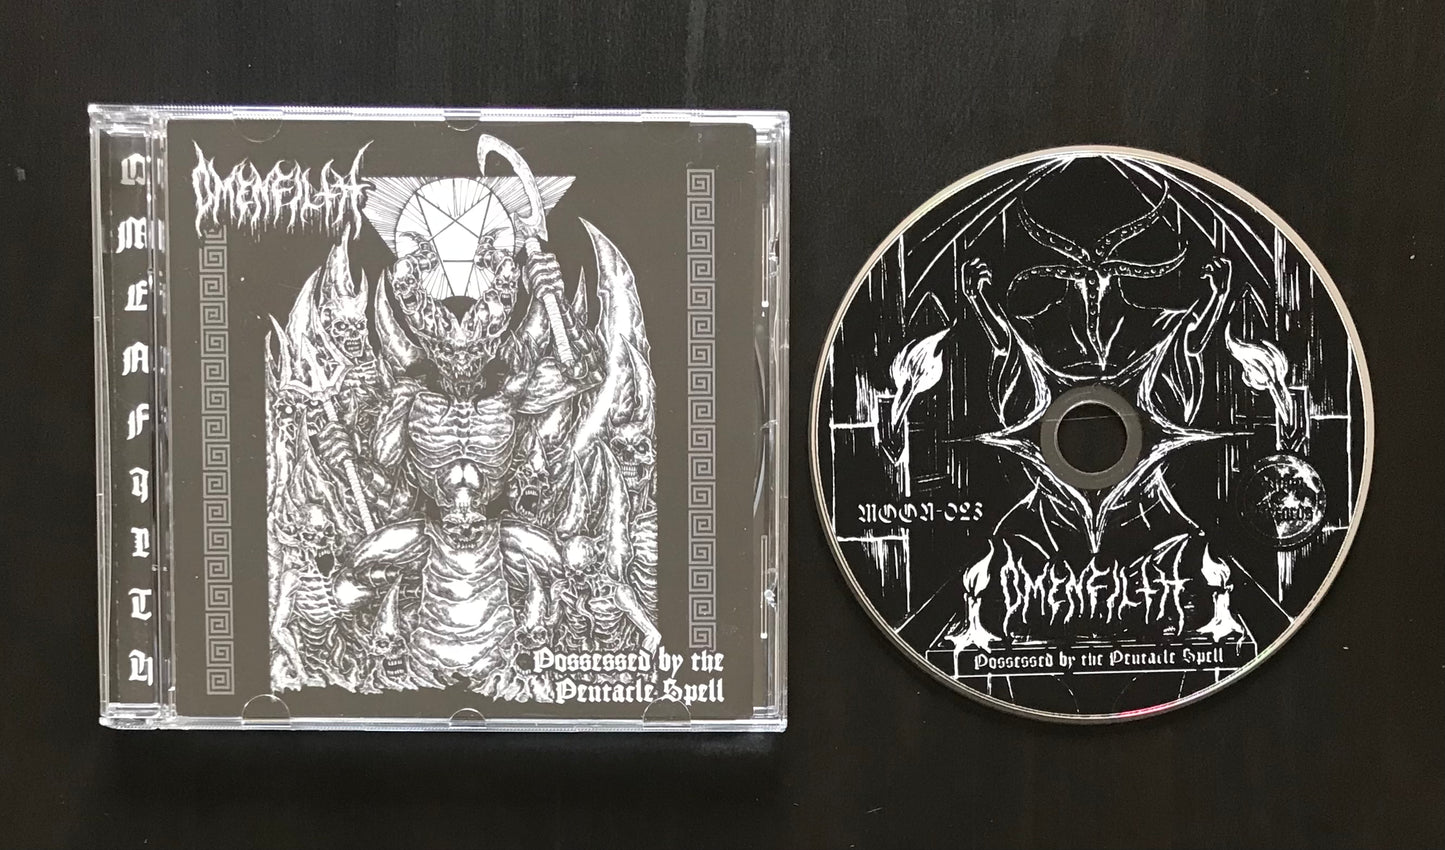 Omenfilth Phil Possessed By The Pentacle Spell Cds Escafismo Records 